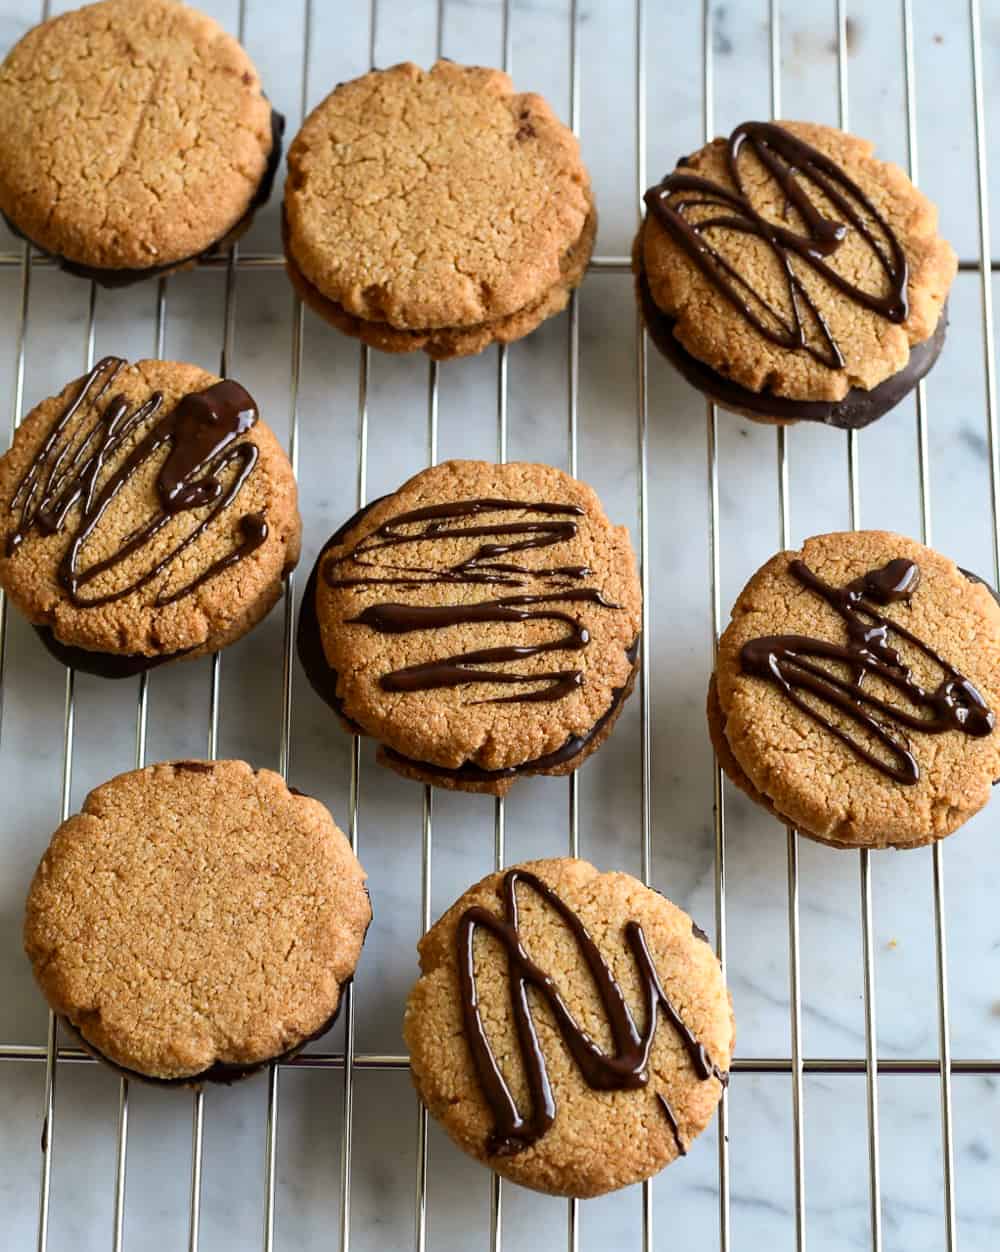 Almond Chocolate Sandwich Cookies with chocolate spirals